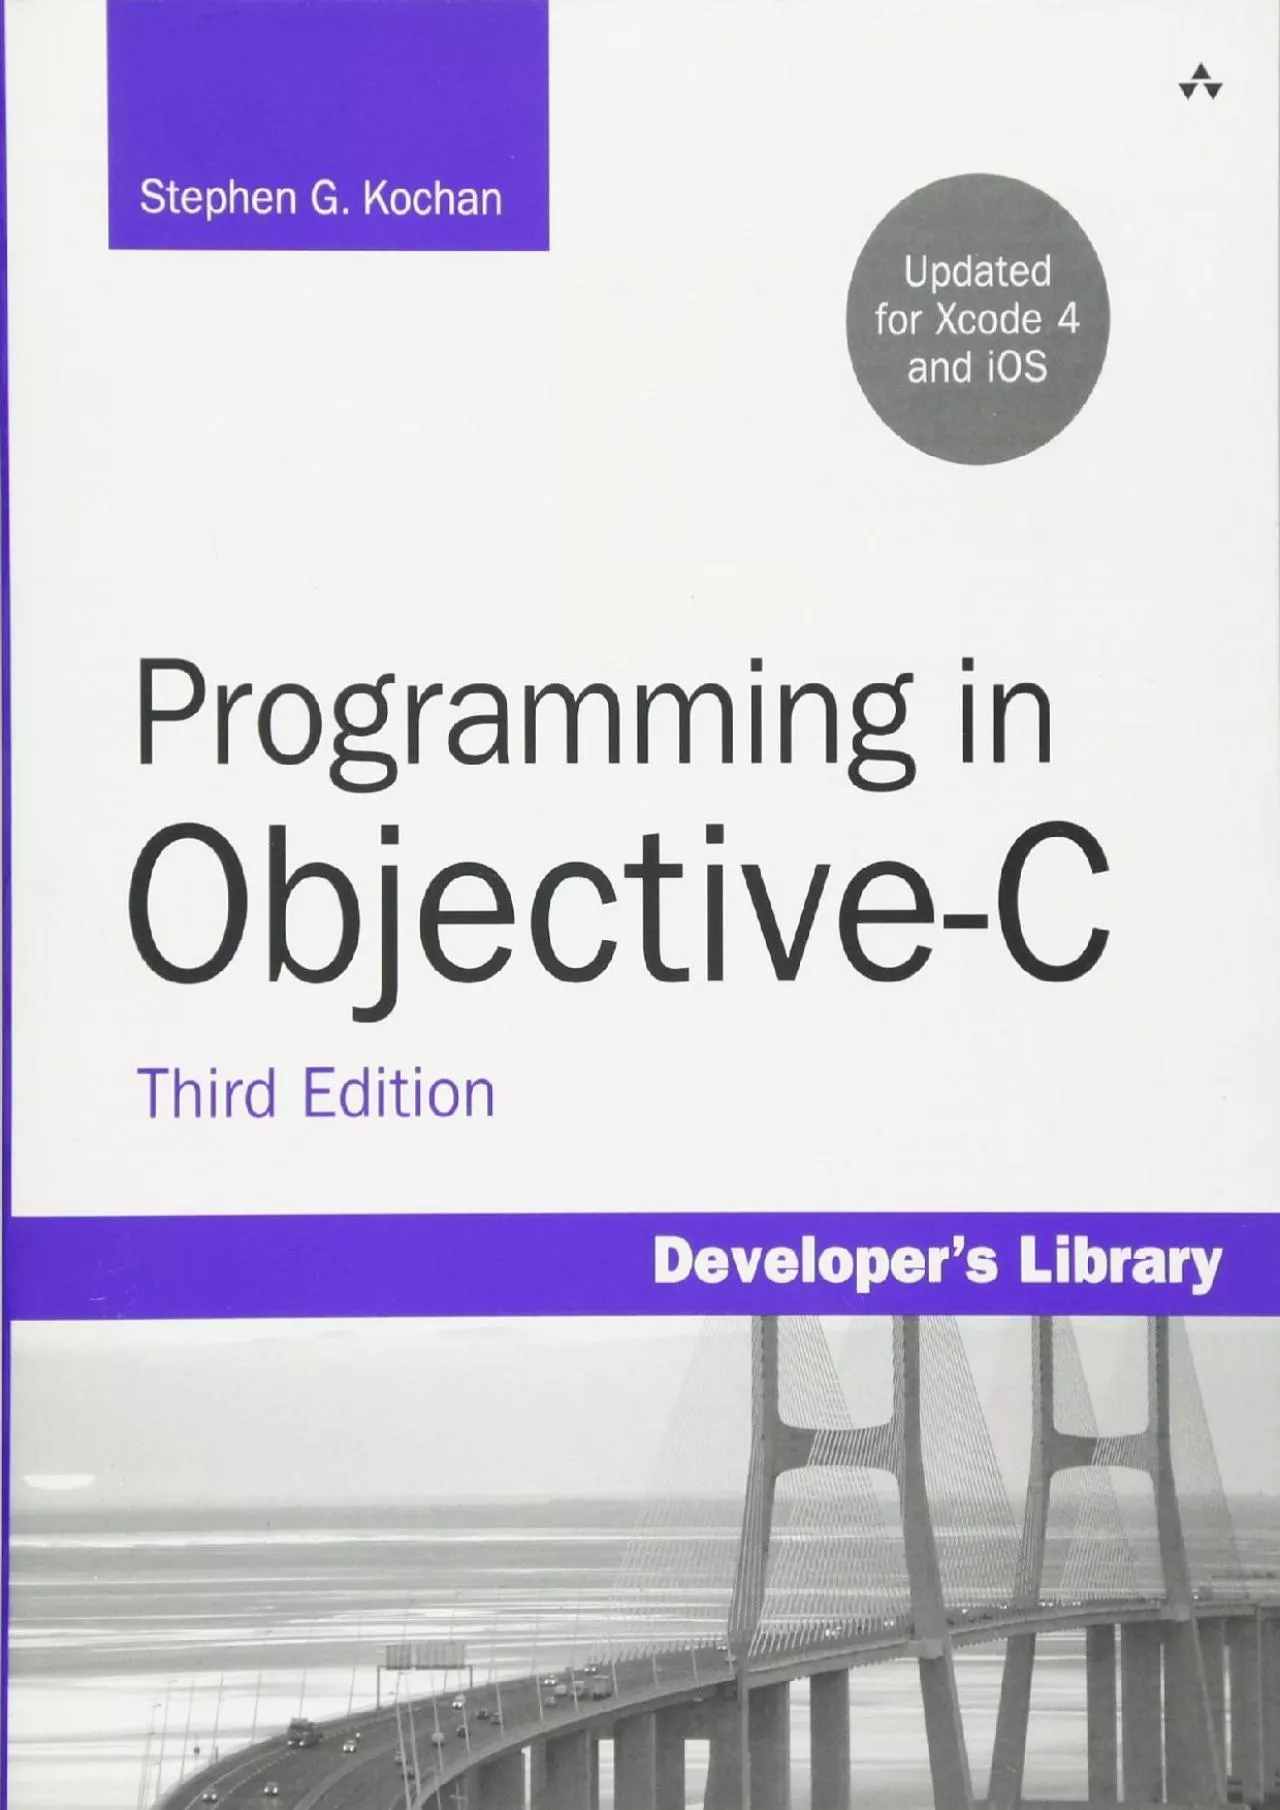 [FREE]-Programming in Objective-C, Third Edition (Developer\'s Library)